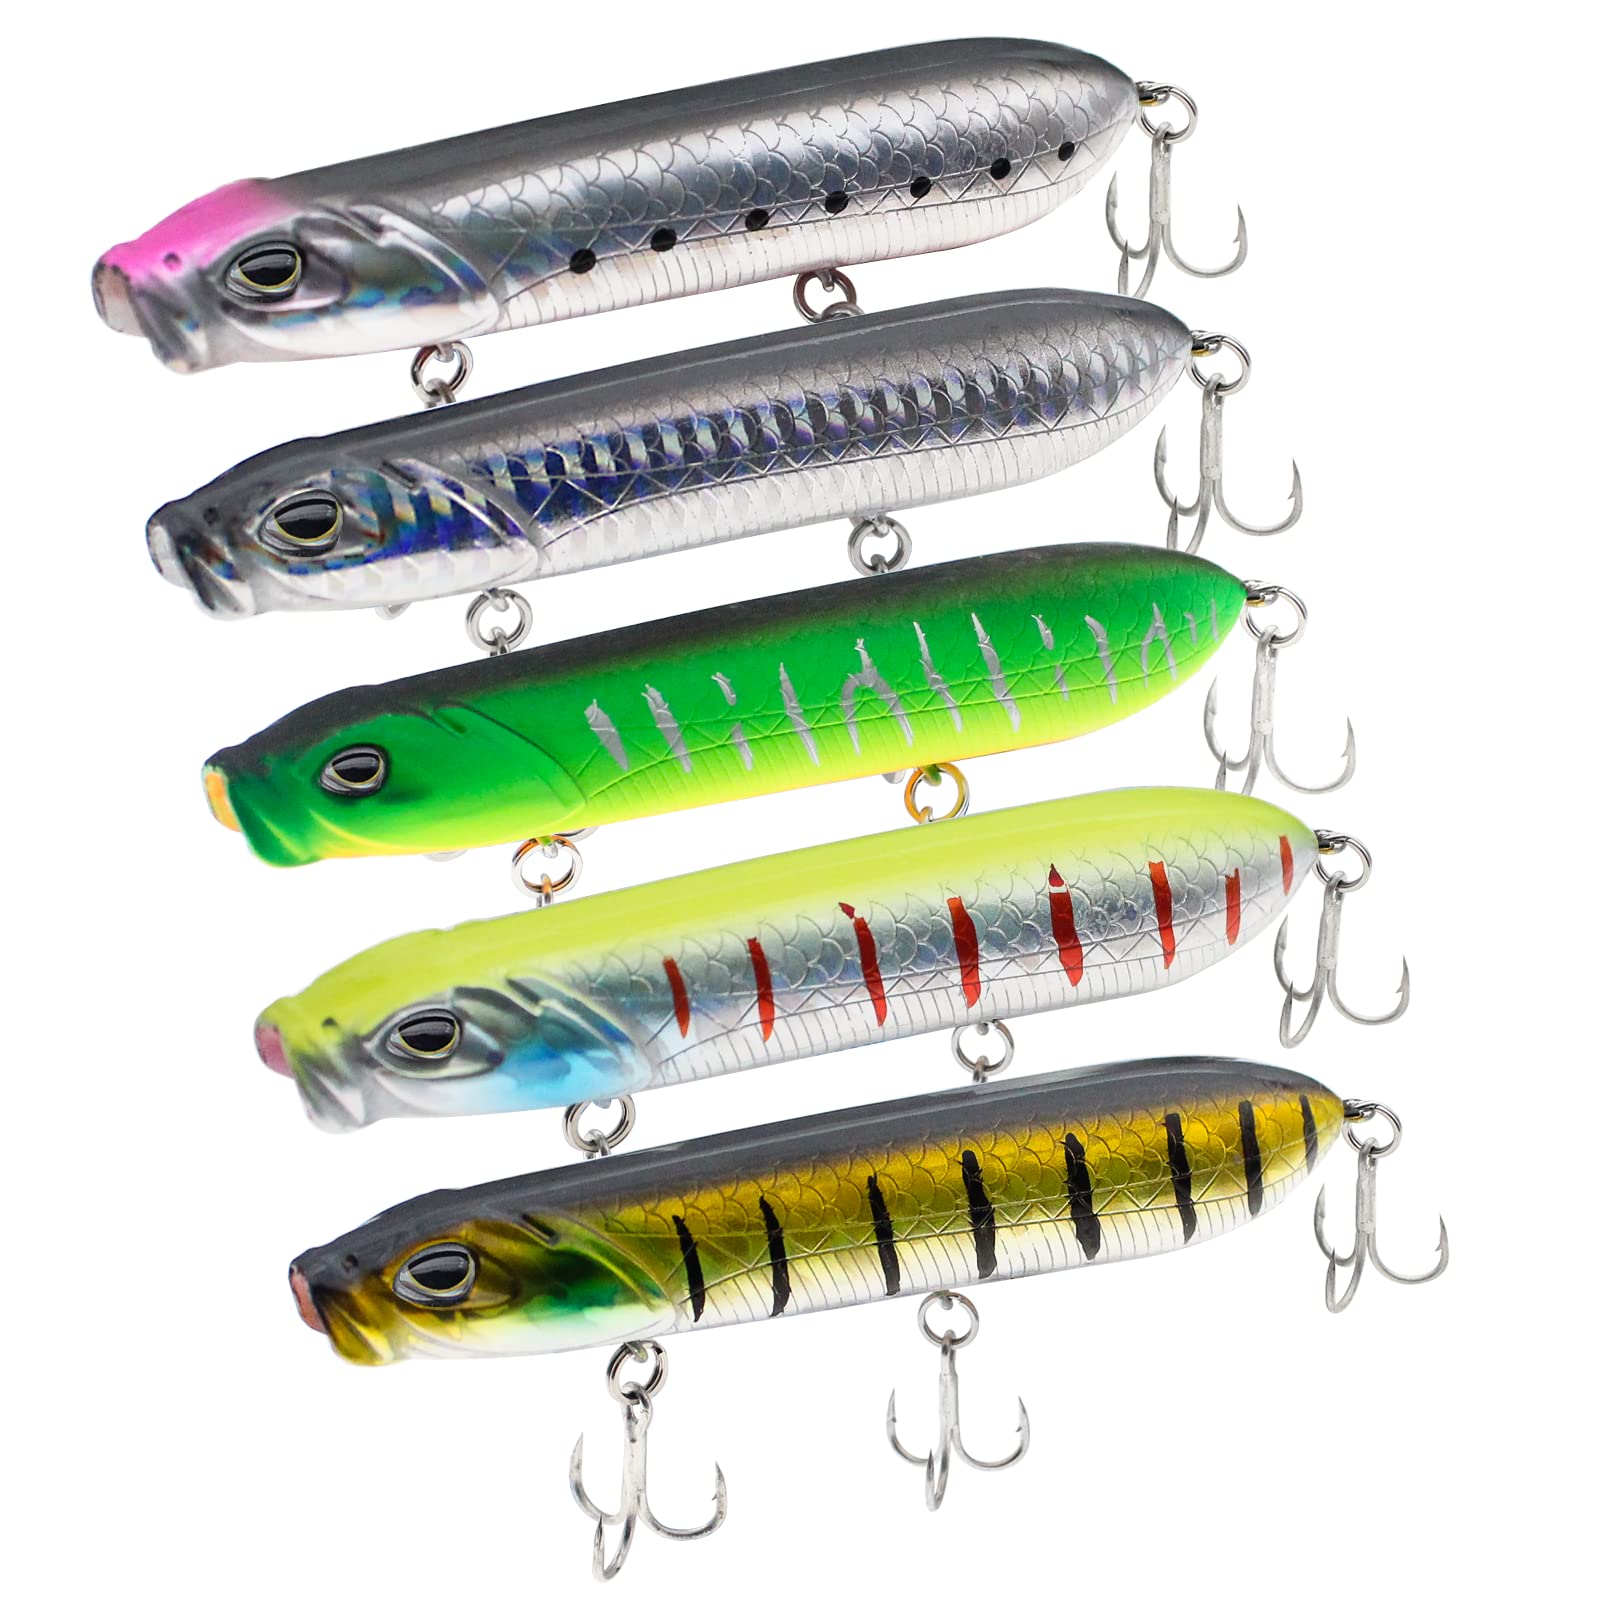  Toddmomy Trout Jigs 5 Pcs Lifelike Fishing Bait Spinnerbaits  Bass Lure Deep Water Lures Musky Lures Saltwater Lures Blade Baits s  Luminous Shrimp Shaped Bait to Rotate Bait Hook Freshwater 